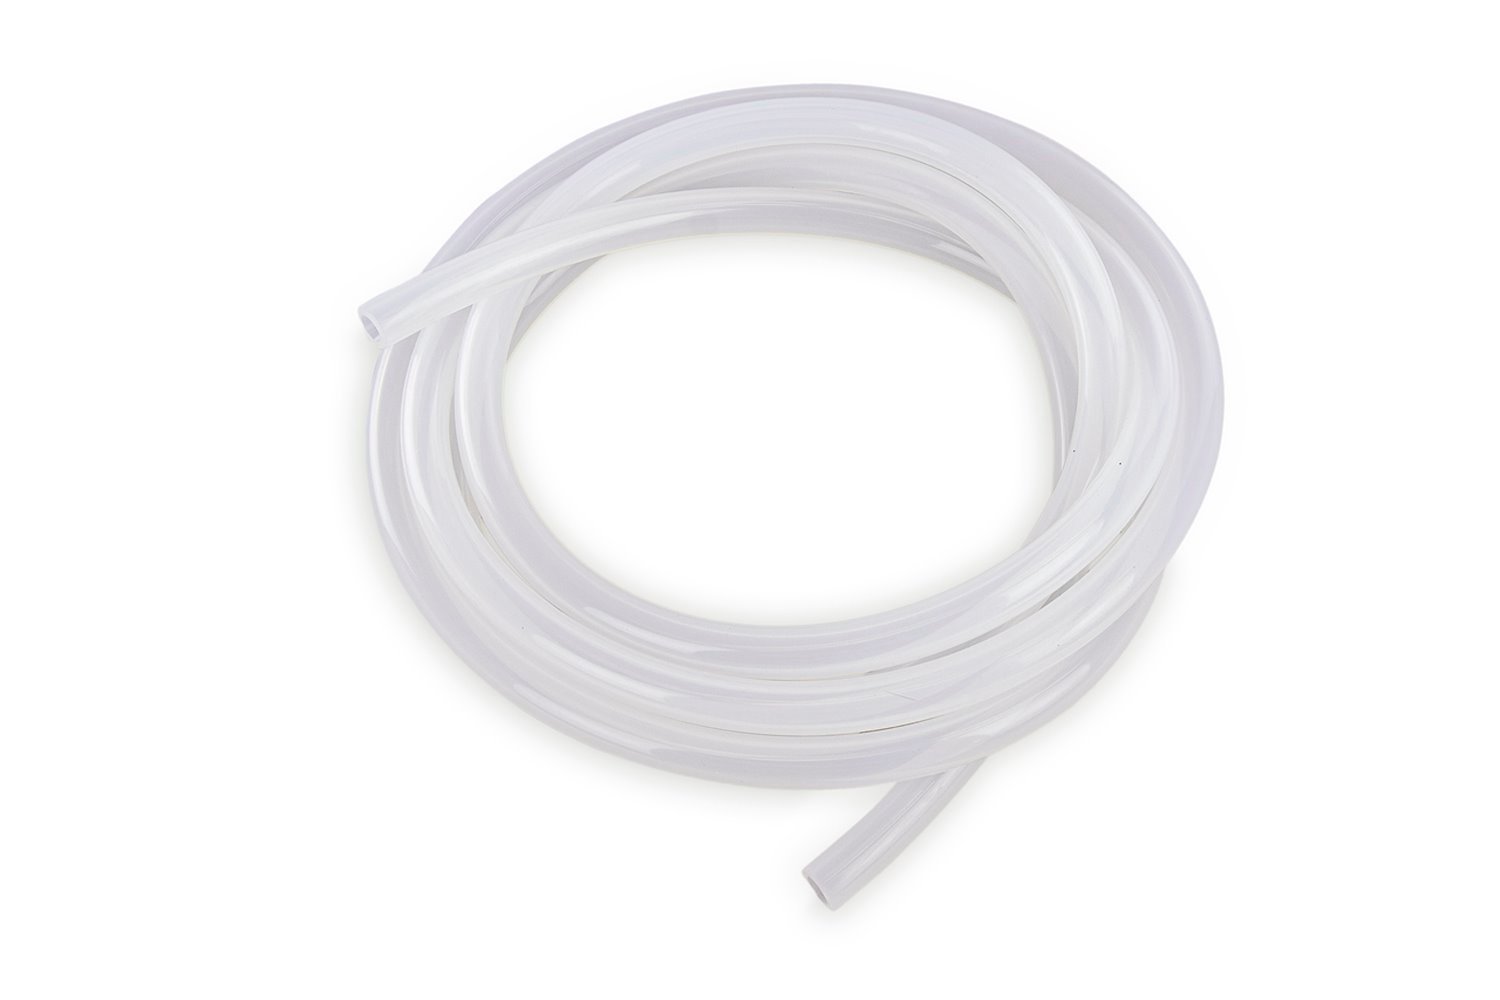 HTSVH95-CLEARx25 High-Temperature Silicone Vacuum Hose Tubing, 3/8 in. ID, 25 ft. Roll, Clear